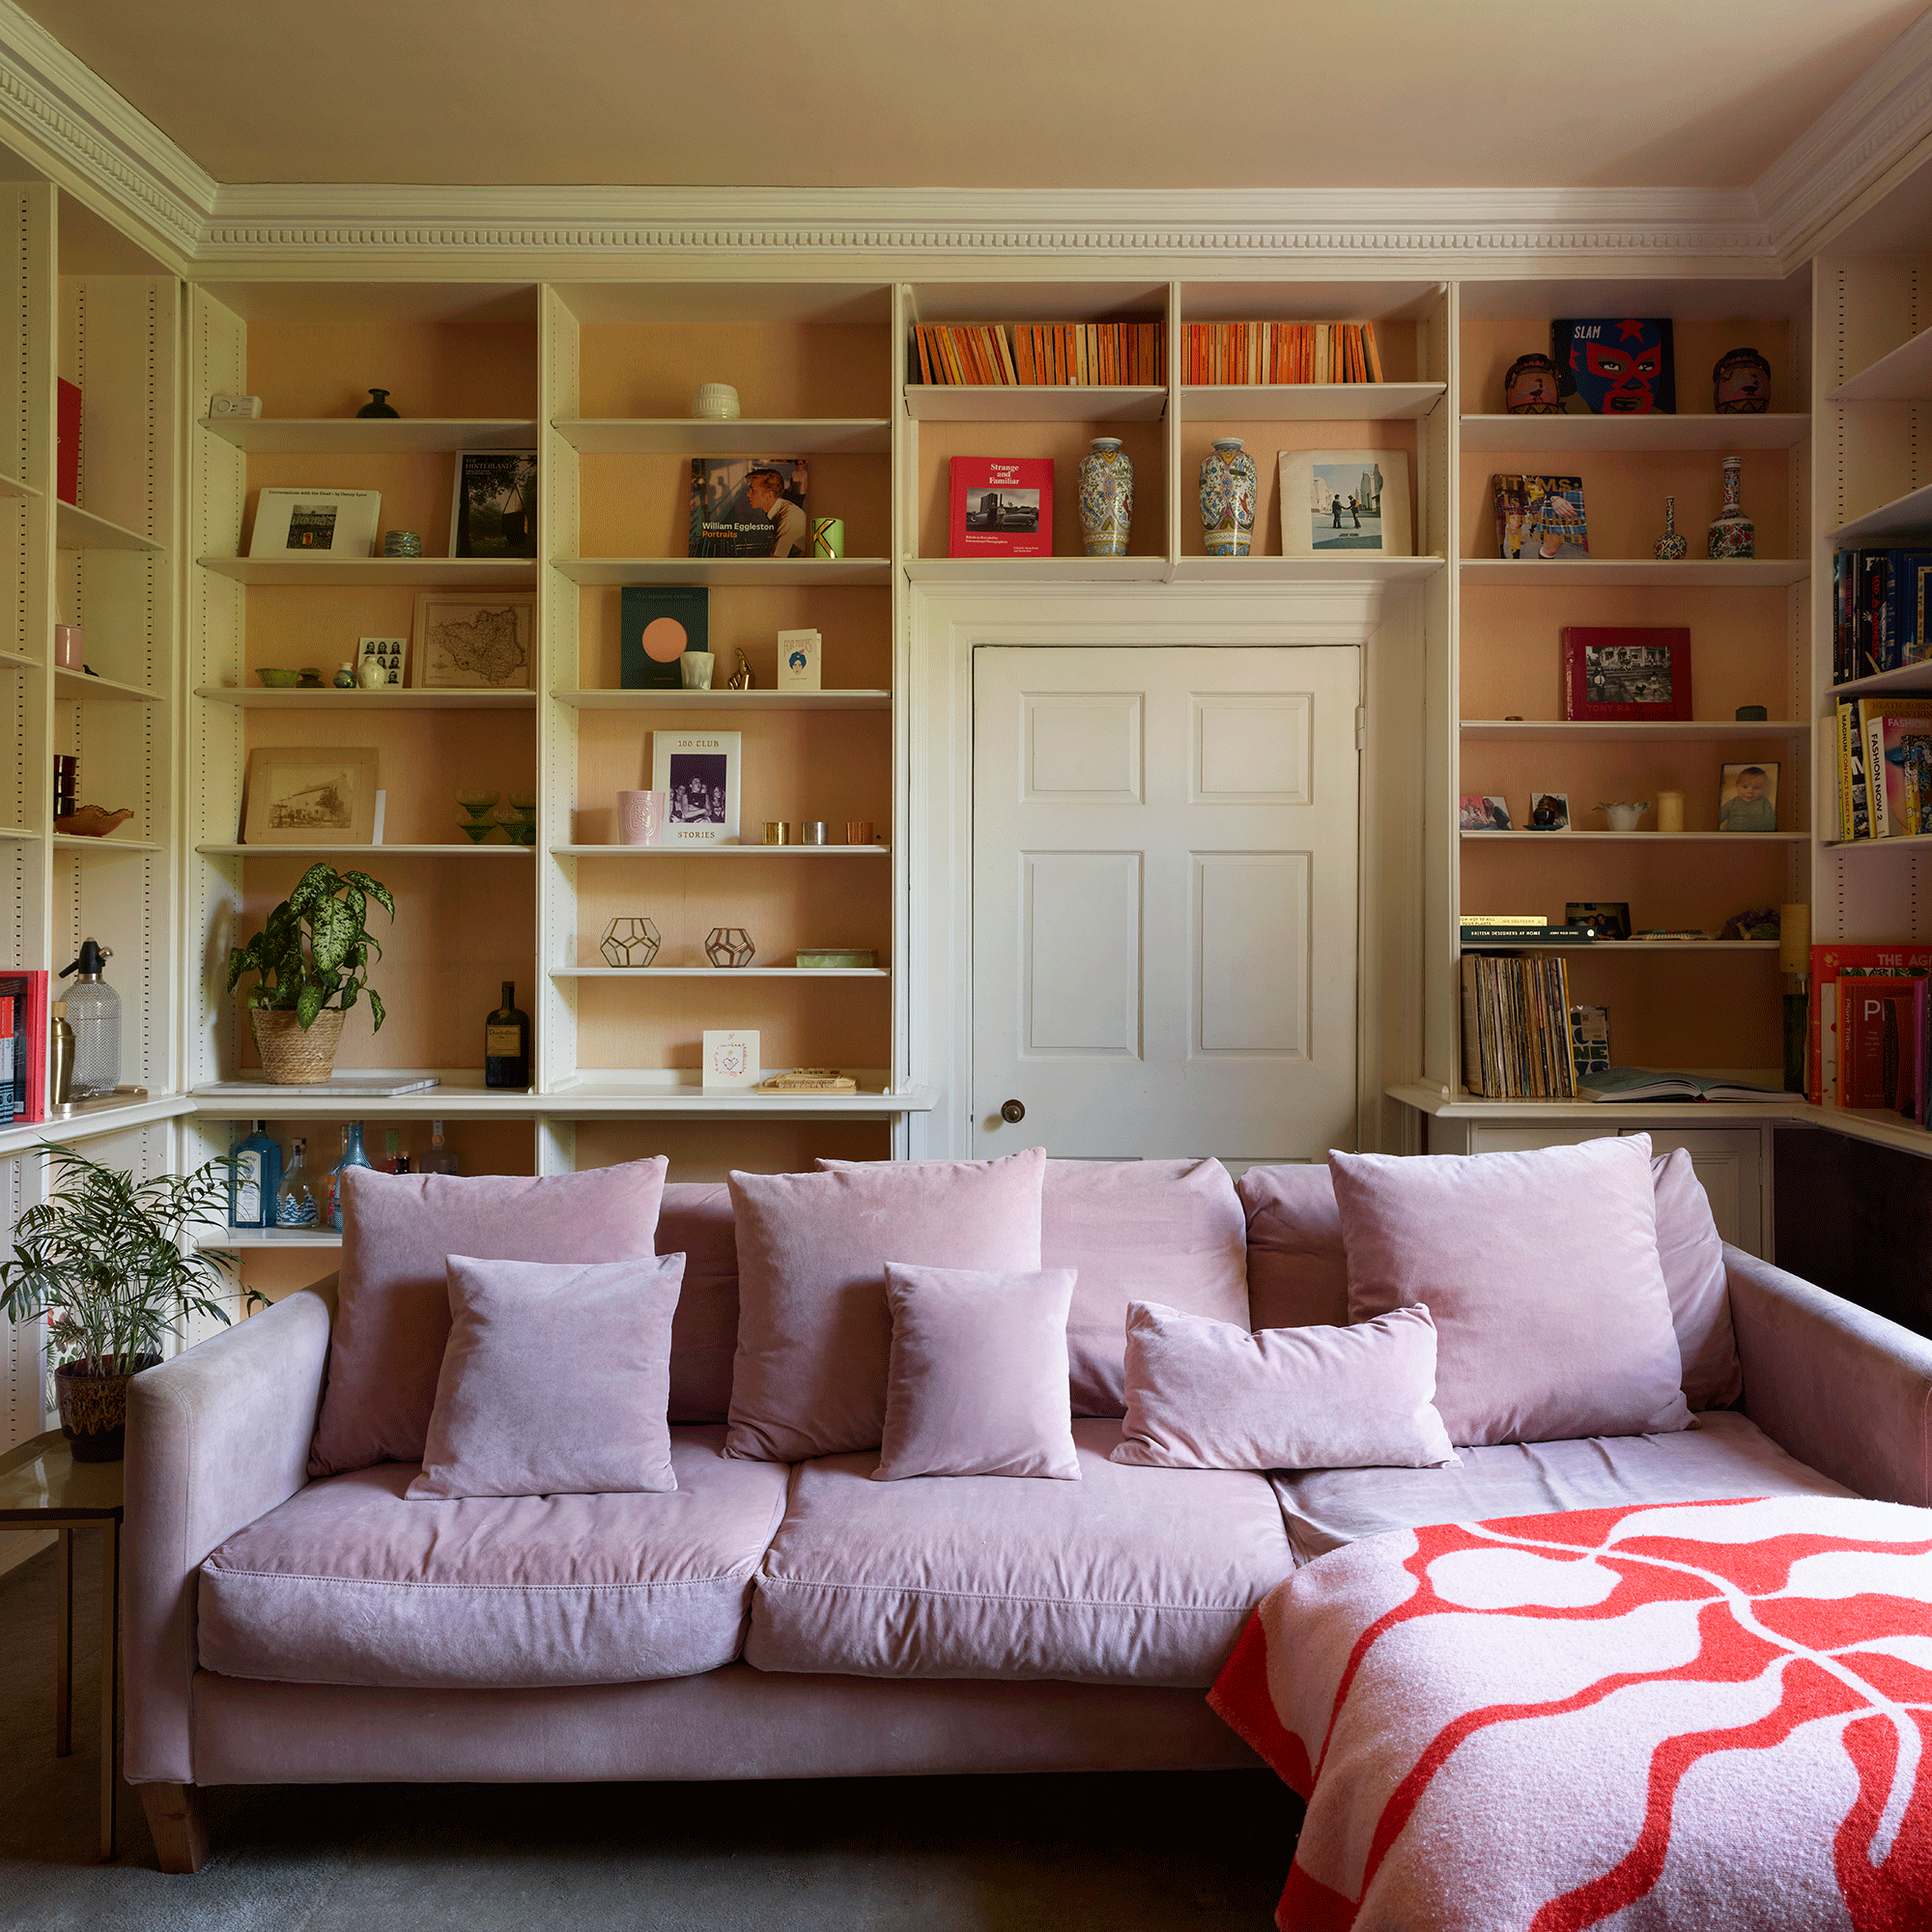 Pink sofa with built in shelves